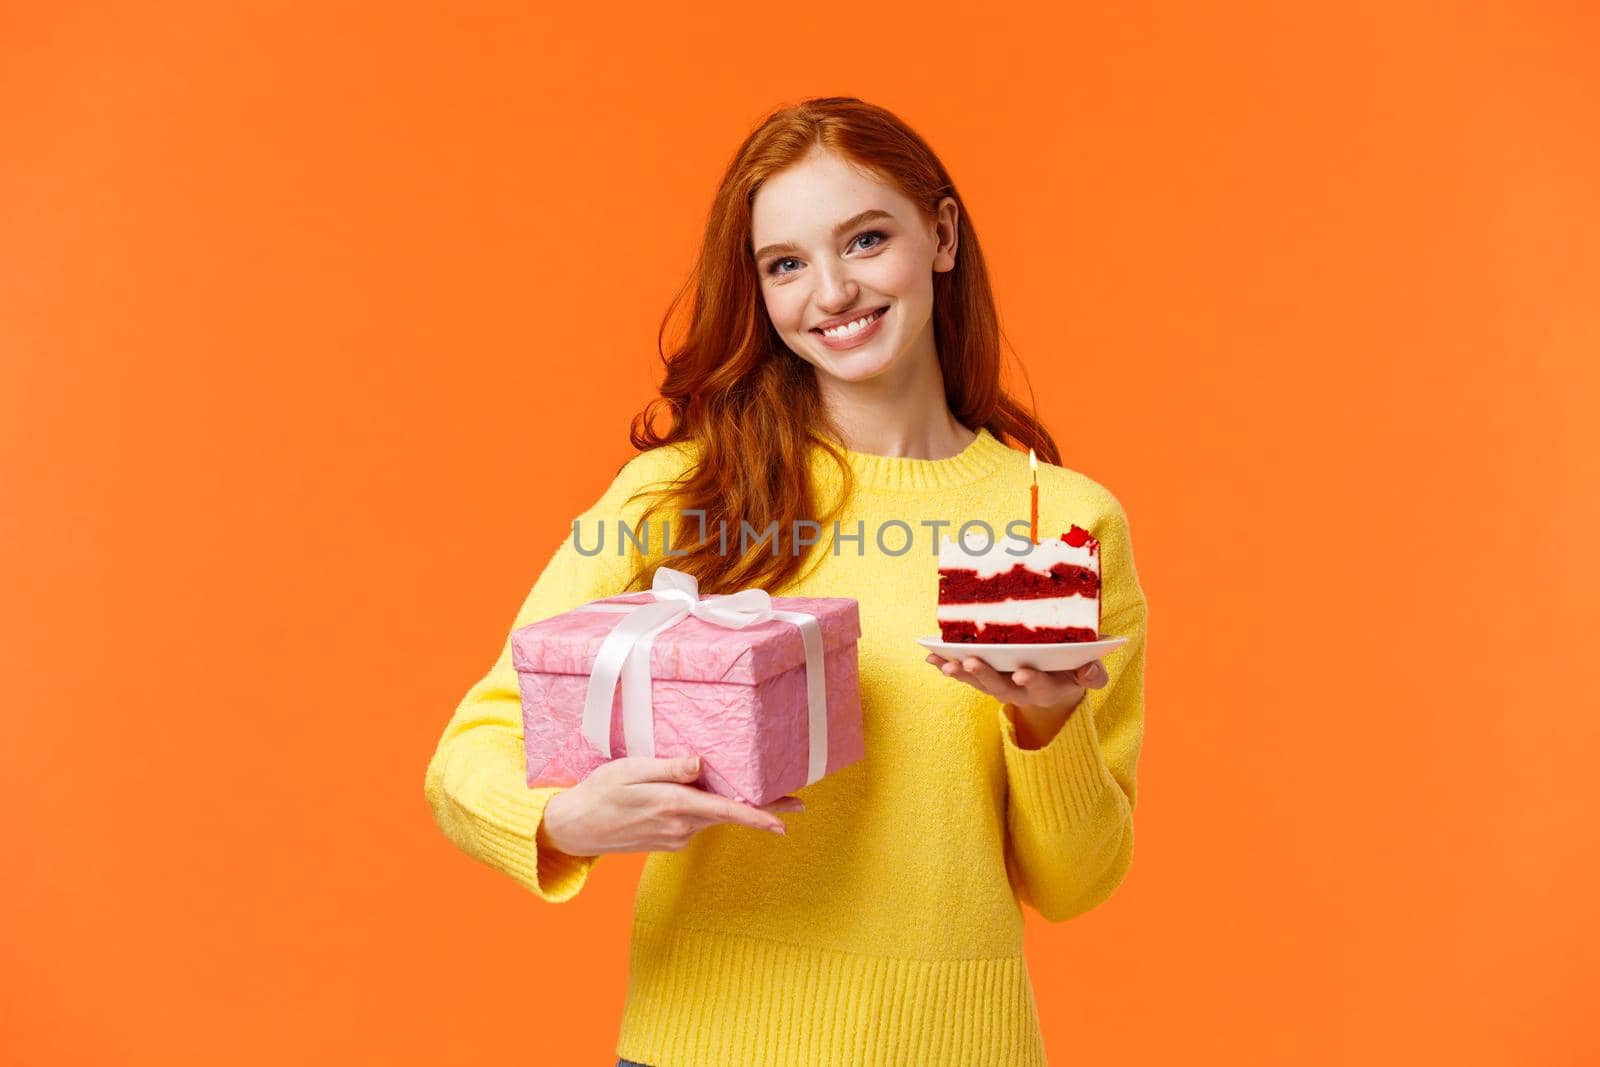 Cute redhead girl coming party with wrapped gift and piece of delicious b-day cake, asking friend blow-out candle and make with celebrating girlfriends birthday, smiling over orange background.